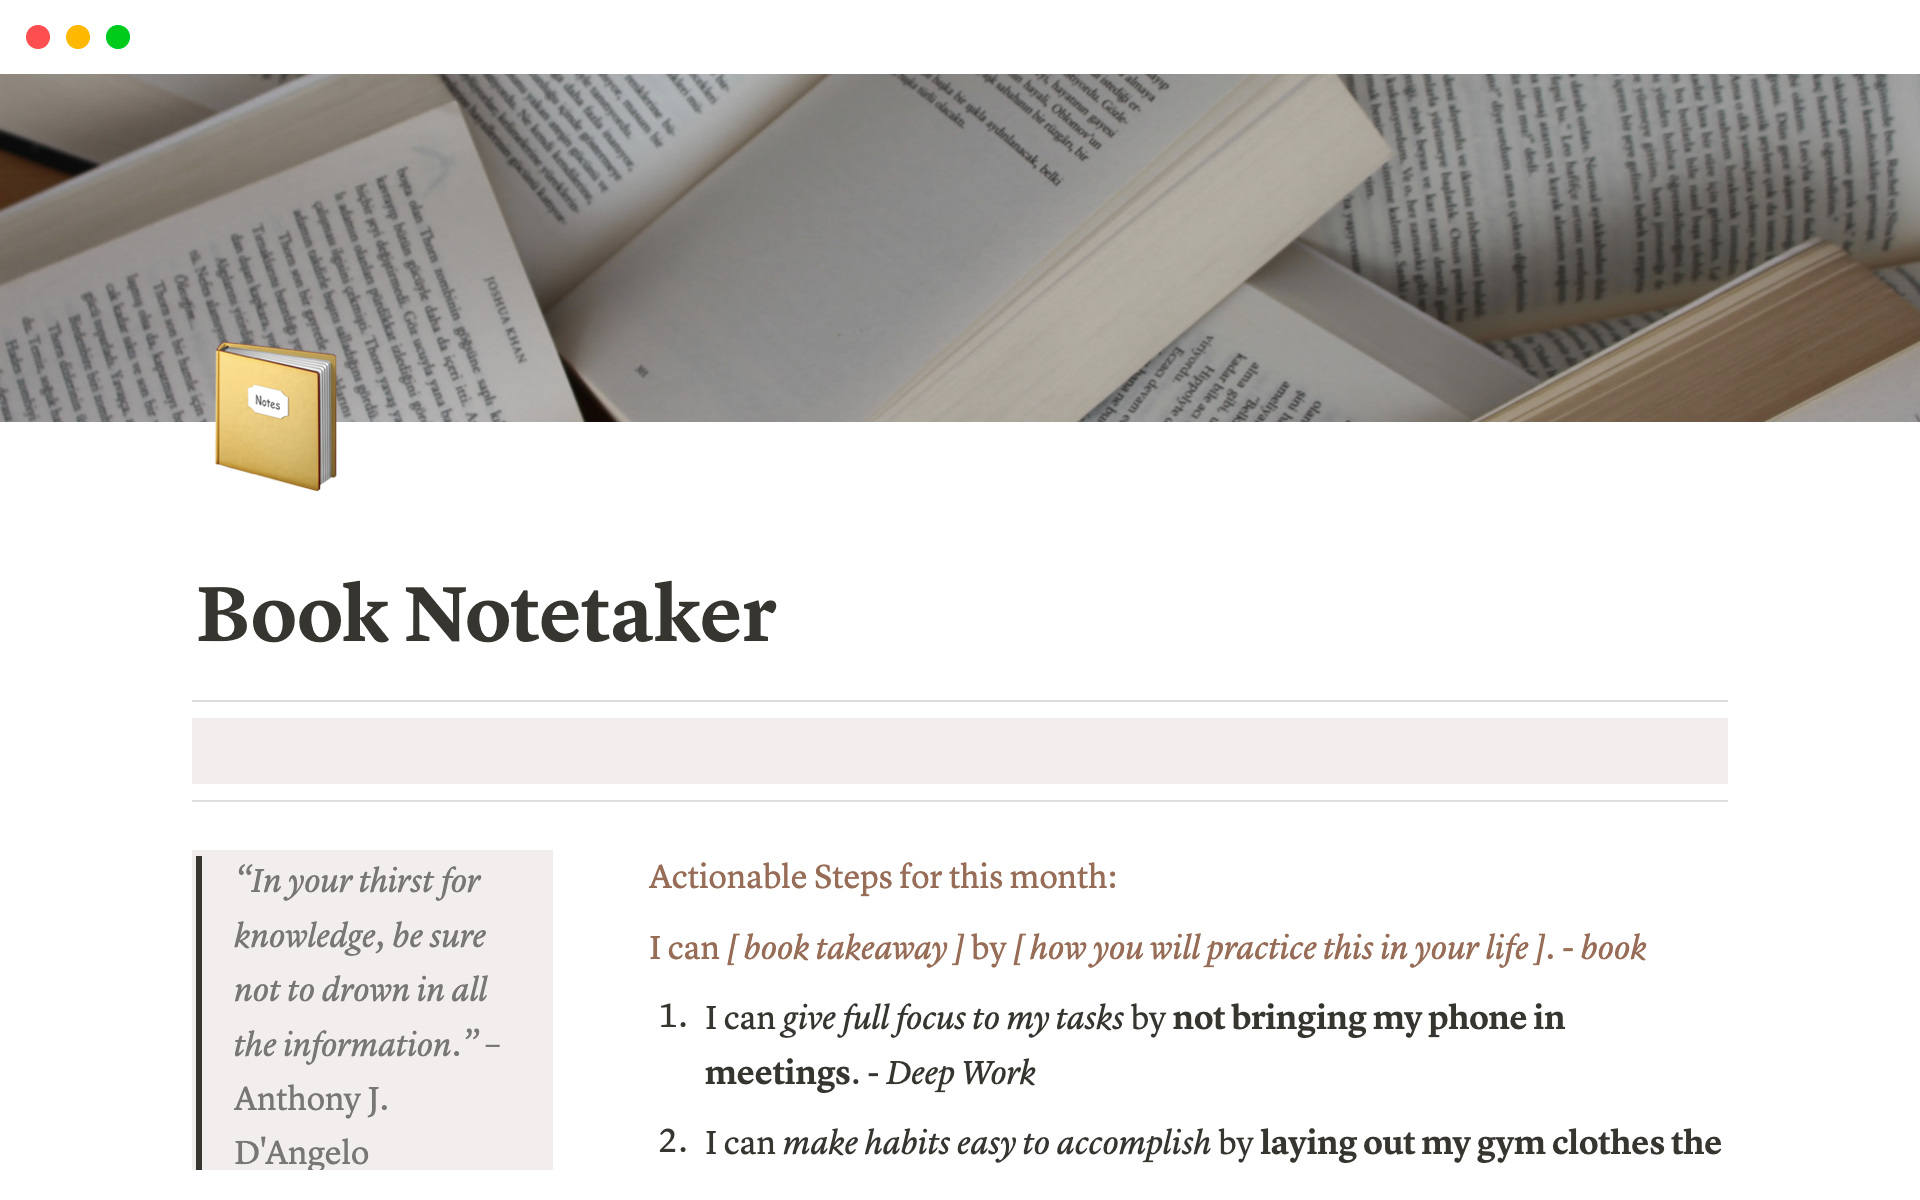 Mallin esikatselu nimelle Book Note-taking on Notion | Intuitive and Understandable Template